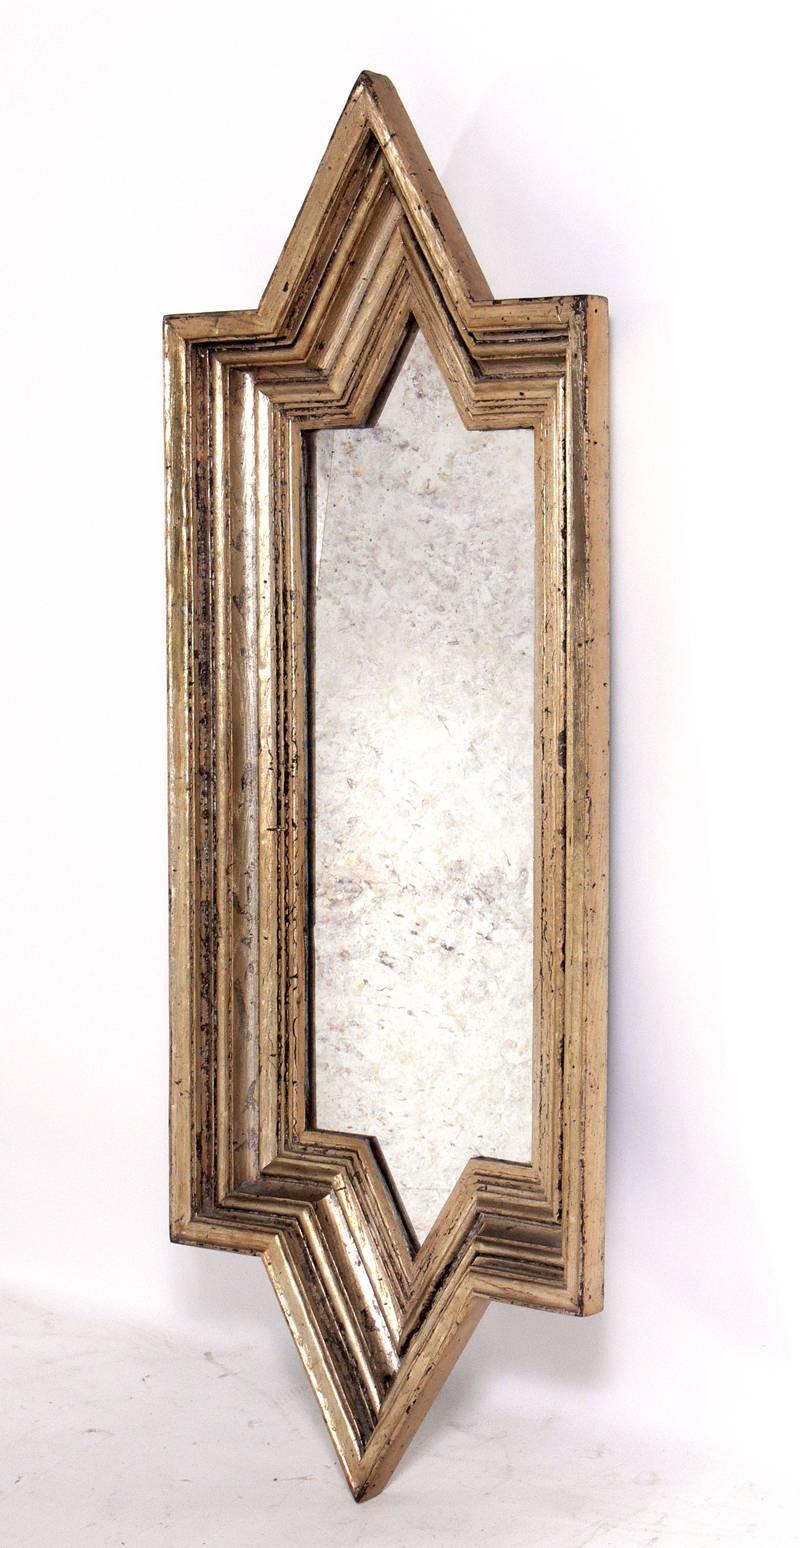 Angular silver leafed mirror, believed to be American, circa 1960s. Warm original patina to both the antiqued mirrored glass and the silver leafed frame.